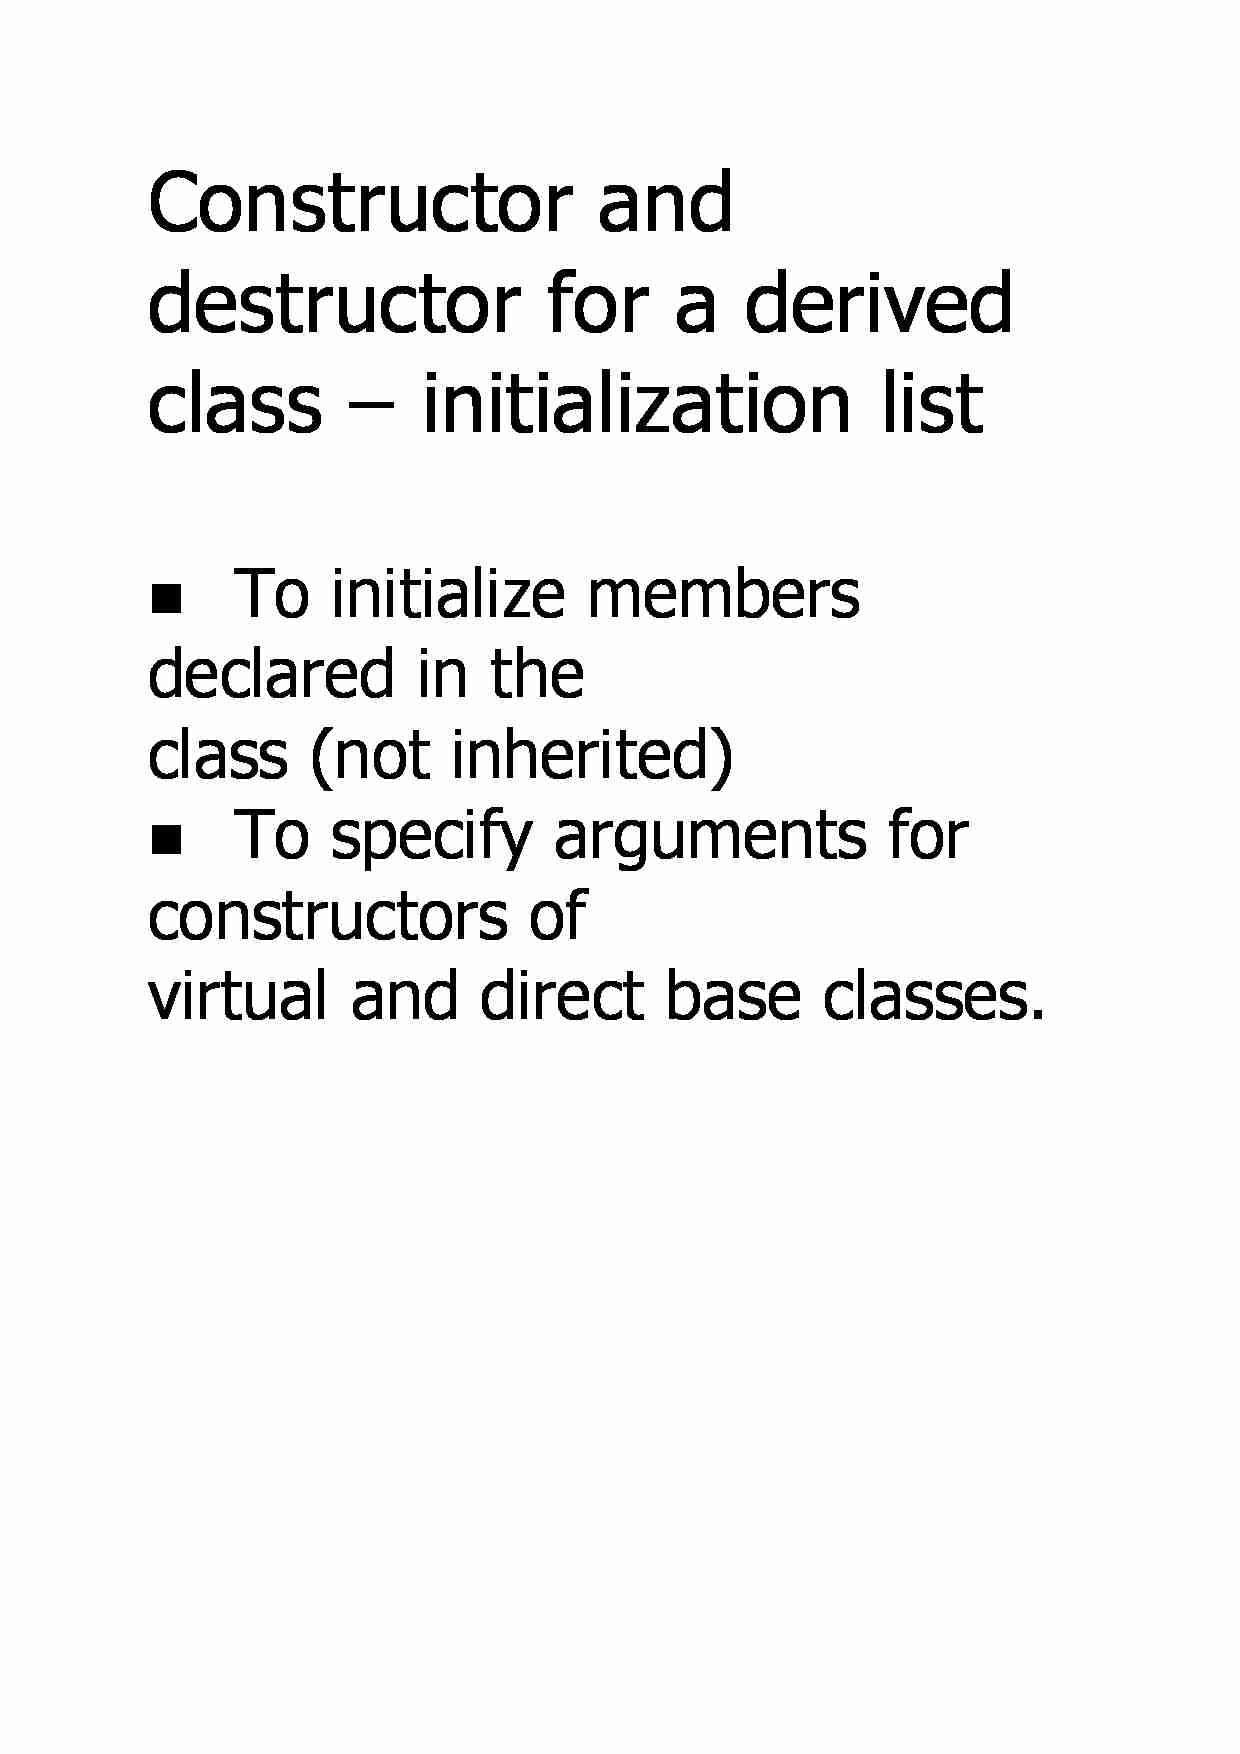 Constructor and destructor for a derived class _ initialization list - strona 1